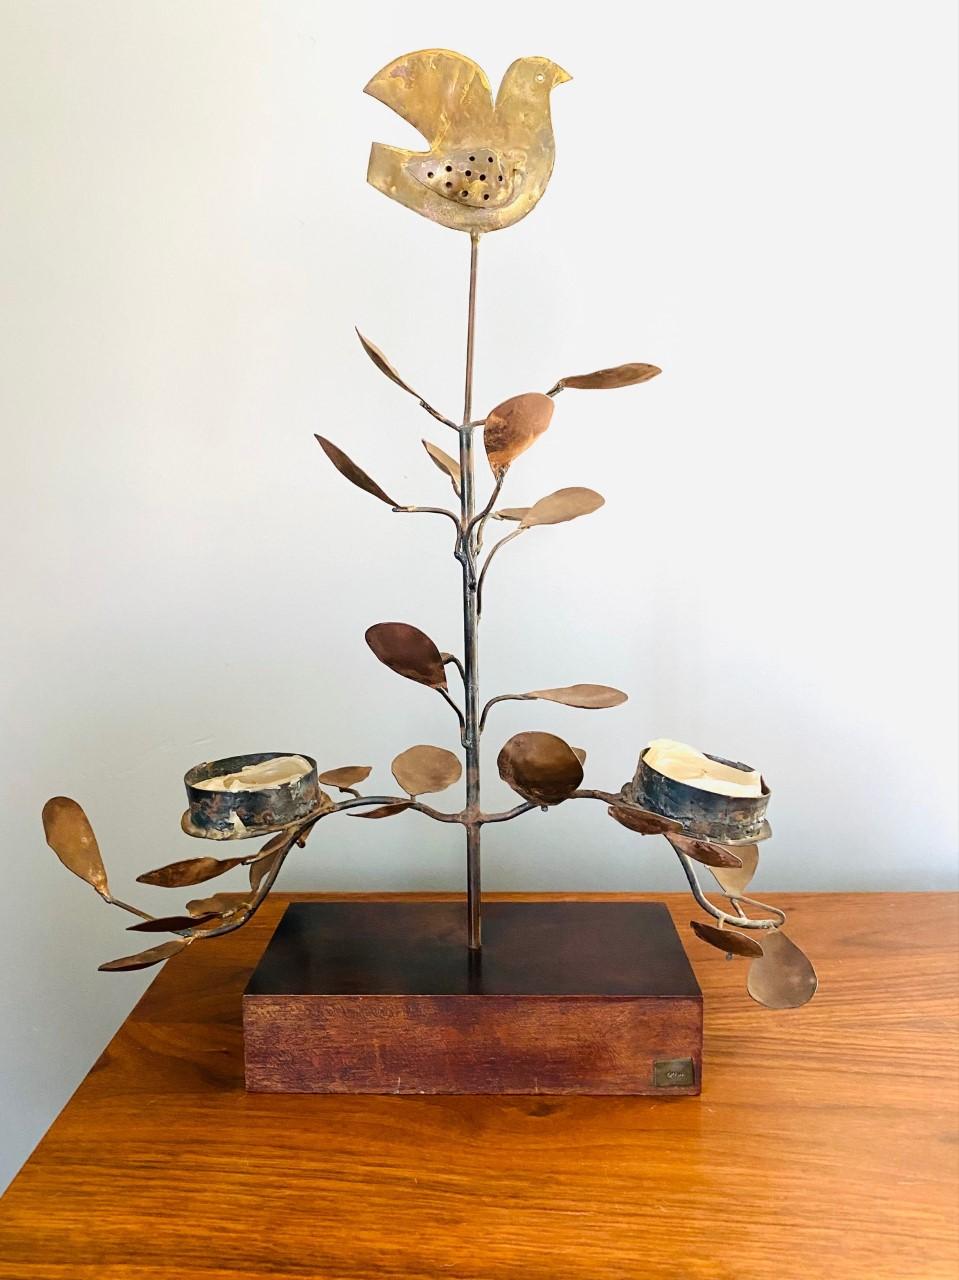 Hand-Crafted Vintage Tree of Life Sculpture by Emaus Talleres Monasticos For Sale